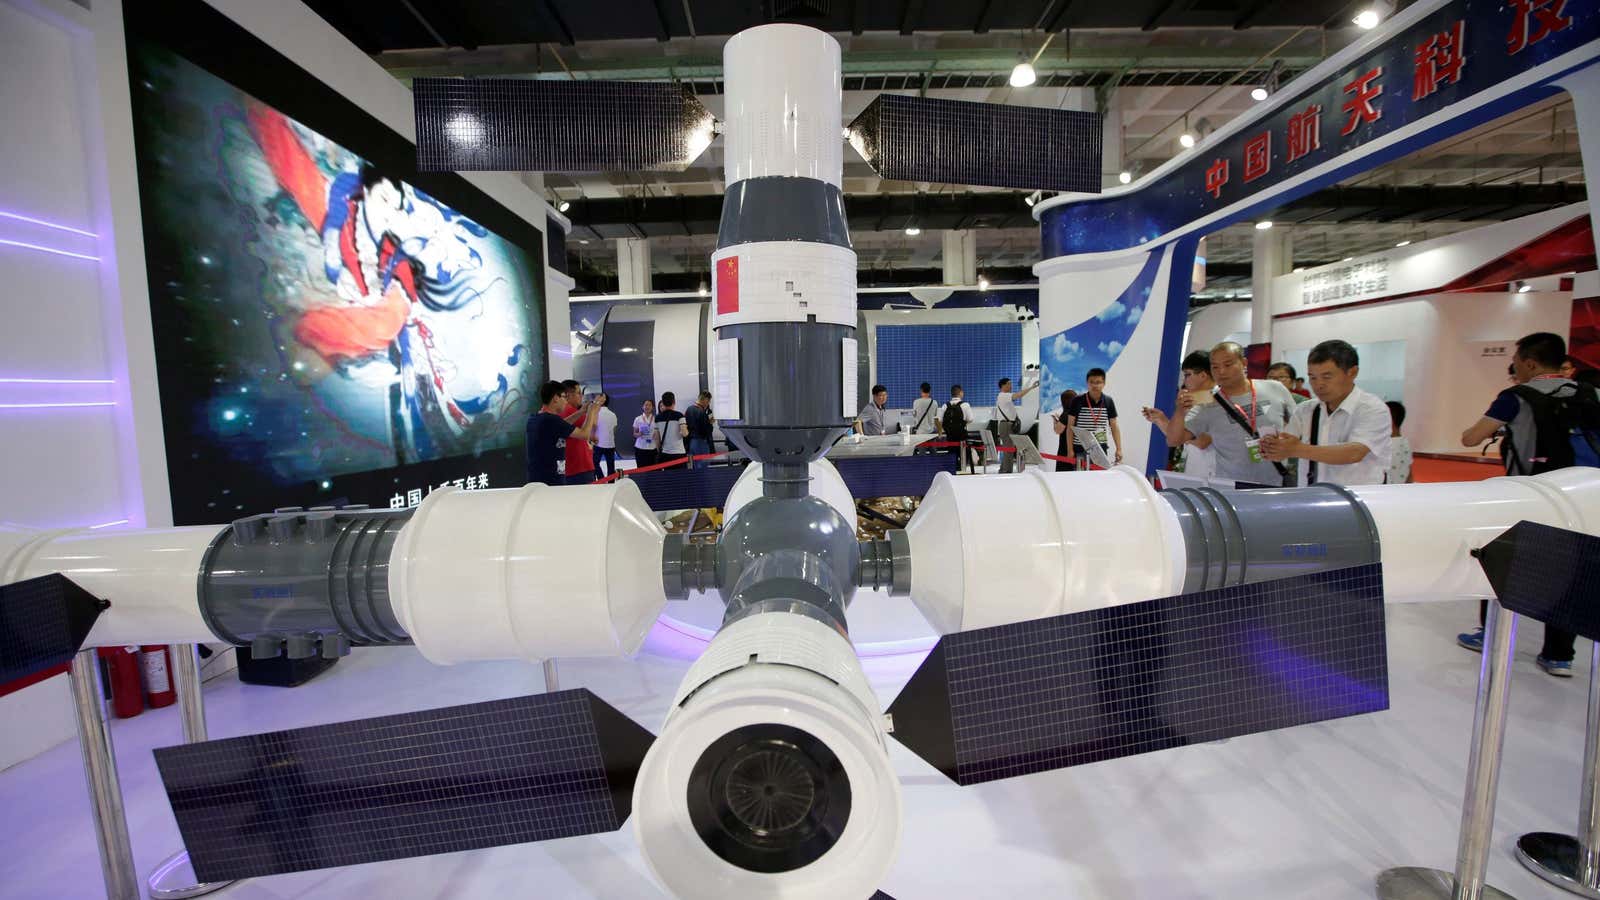 A model of the space station from China Aerospace Science and Technology Corporation.